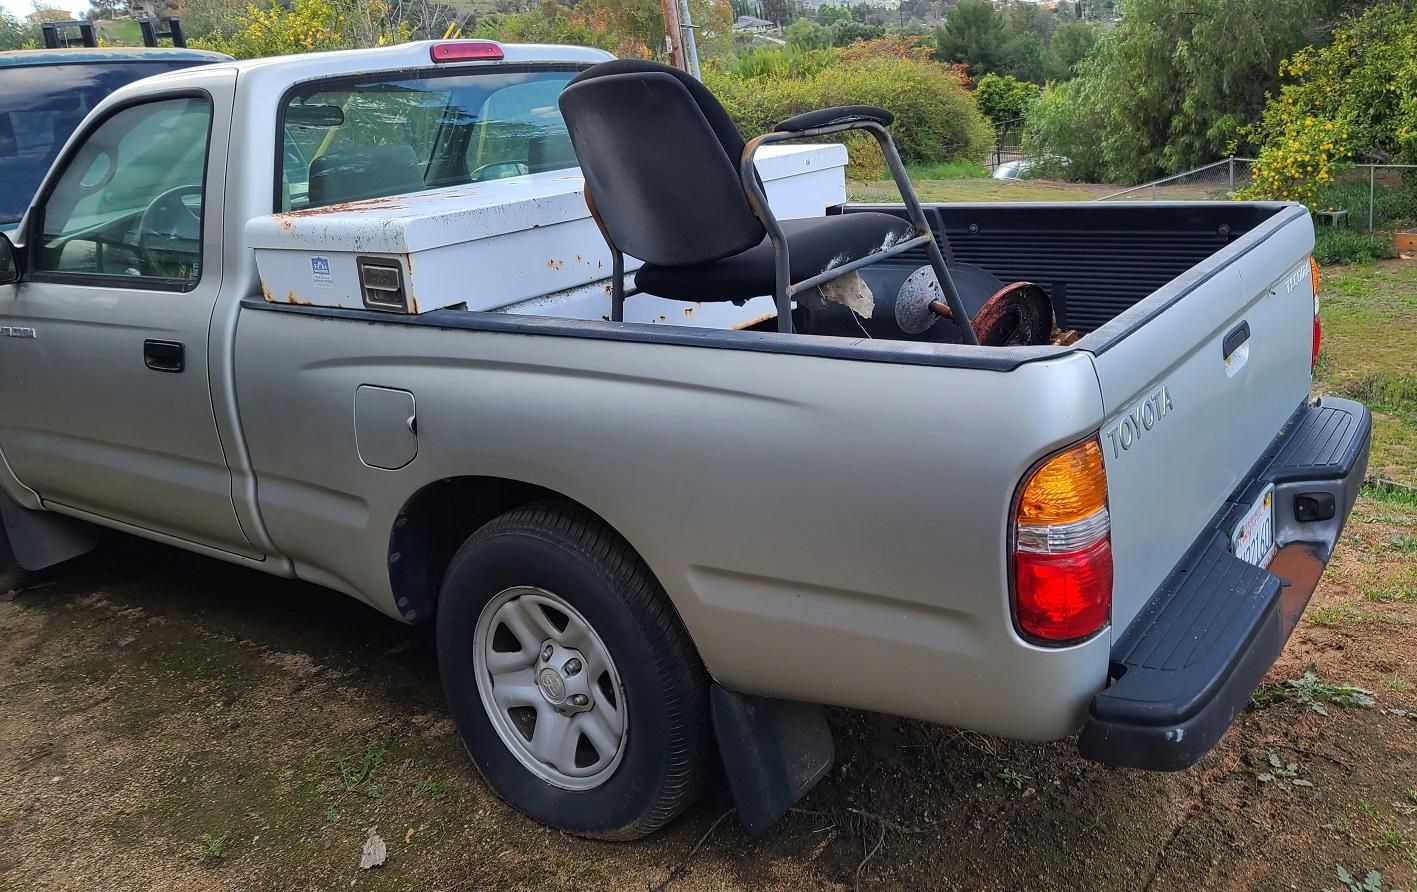 Toyota Tacoma Pickup Truck Front End Wreaked